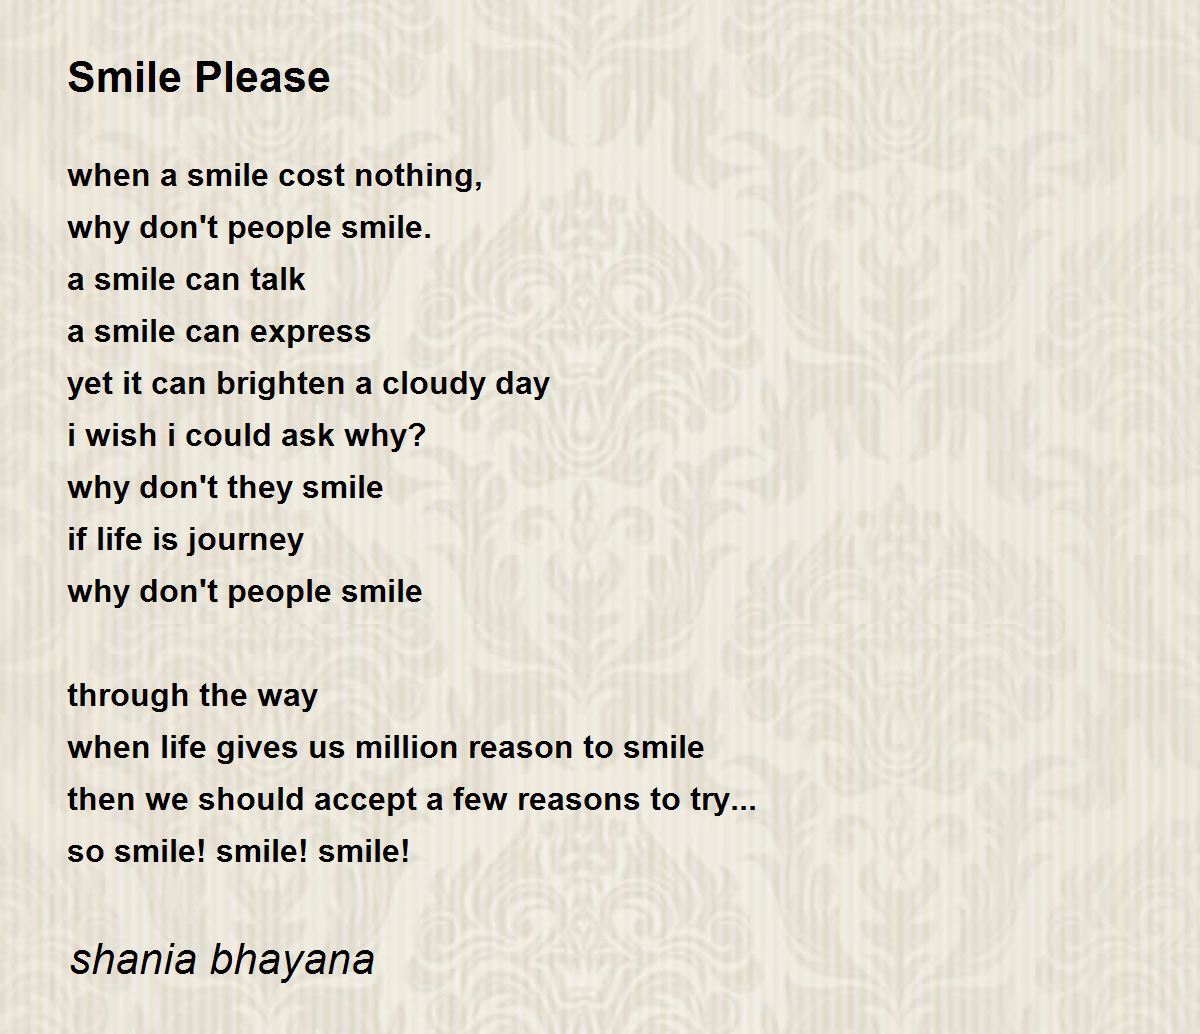 Smile Please - Smile Please Poem by shania bhayana